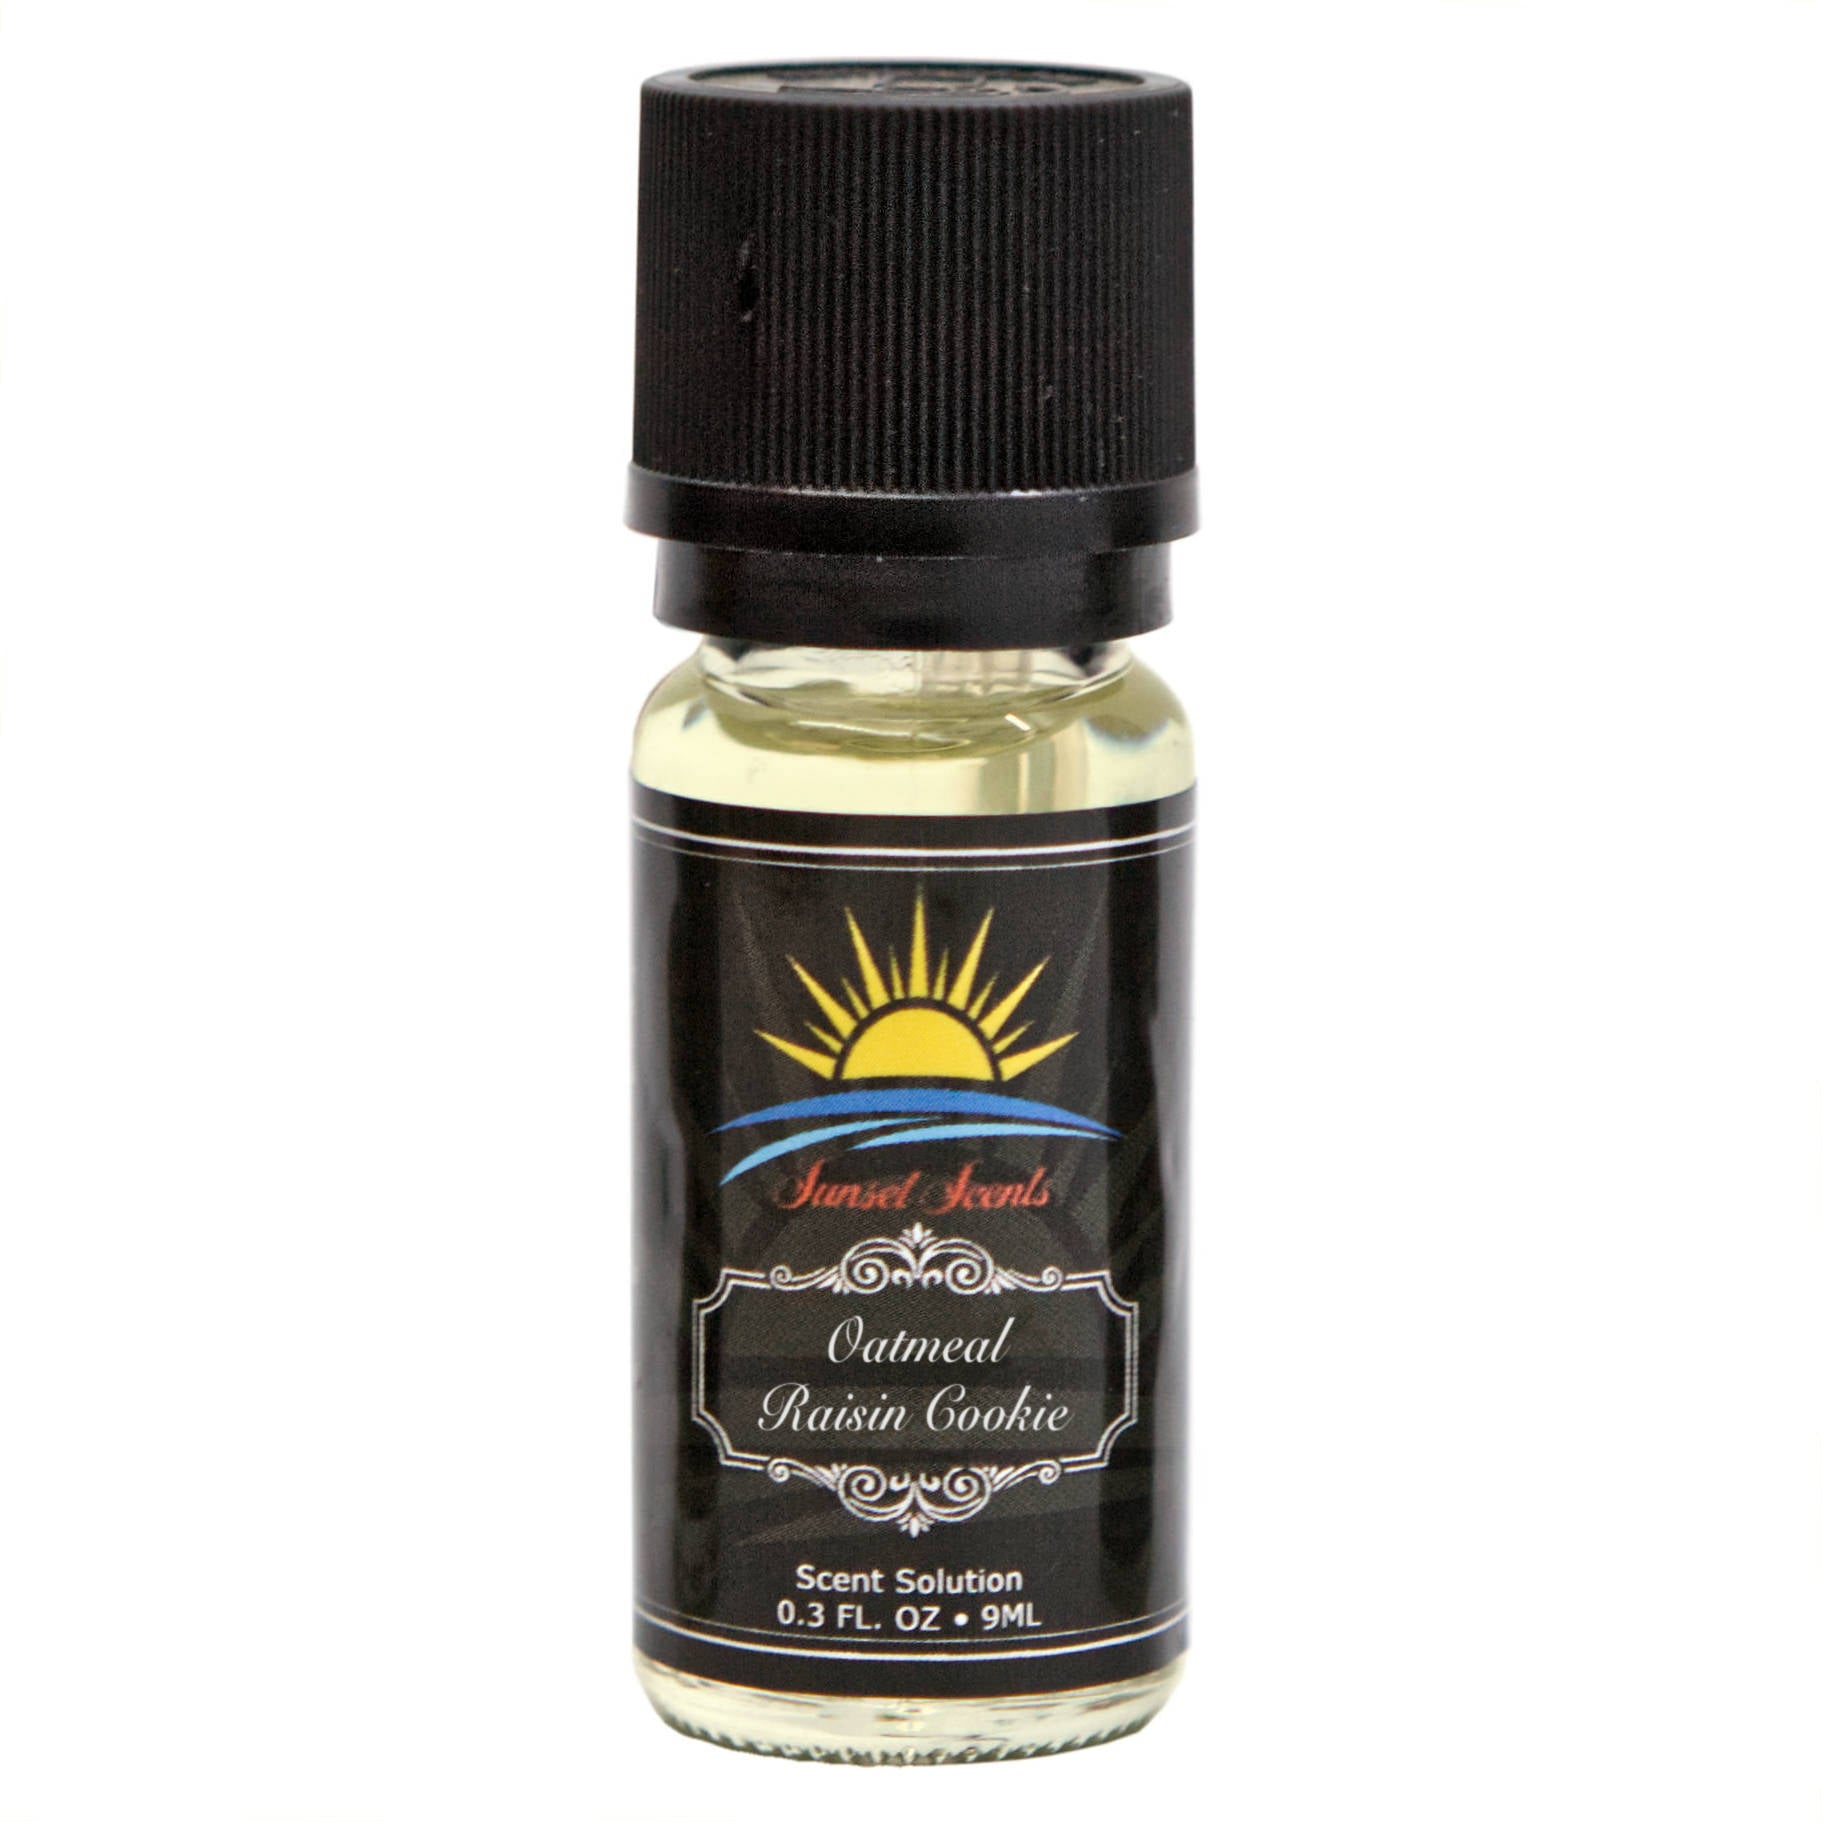 Oatmeal Raisin Cookie Scent Solution Fragrance Oil